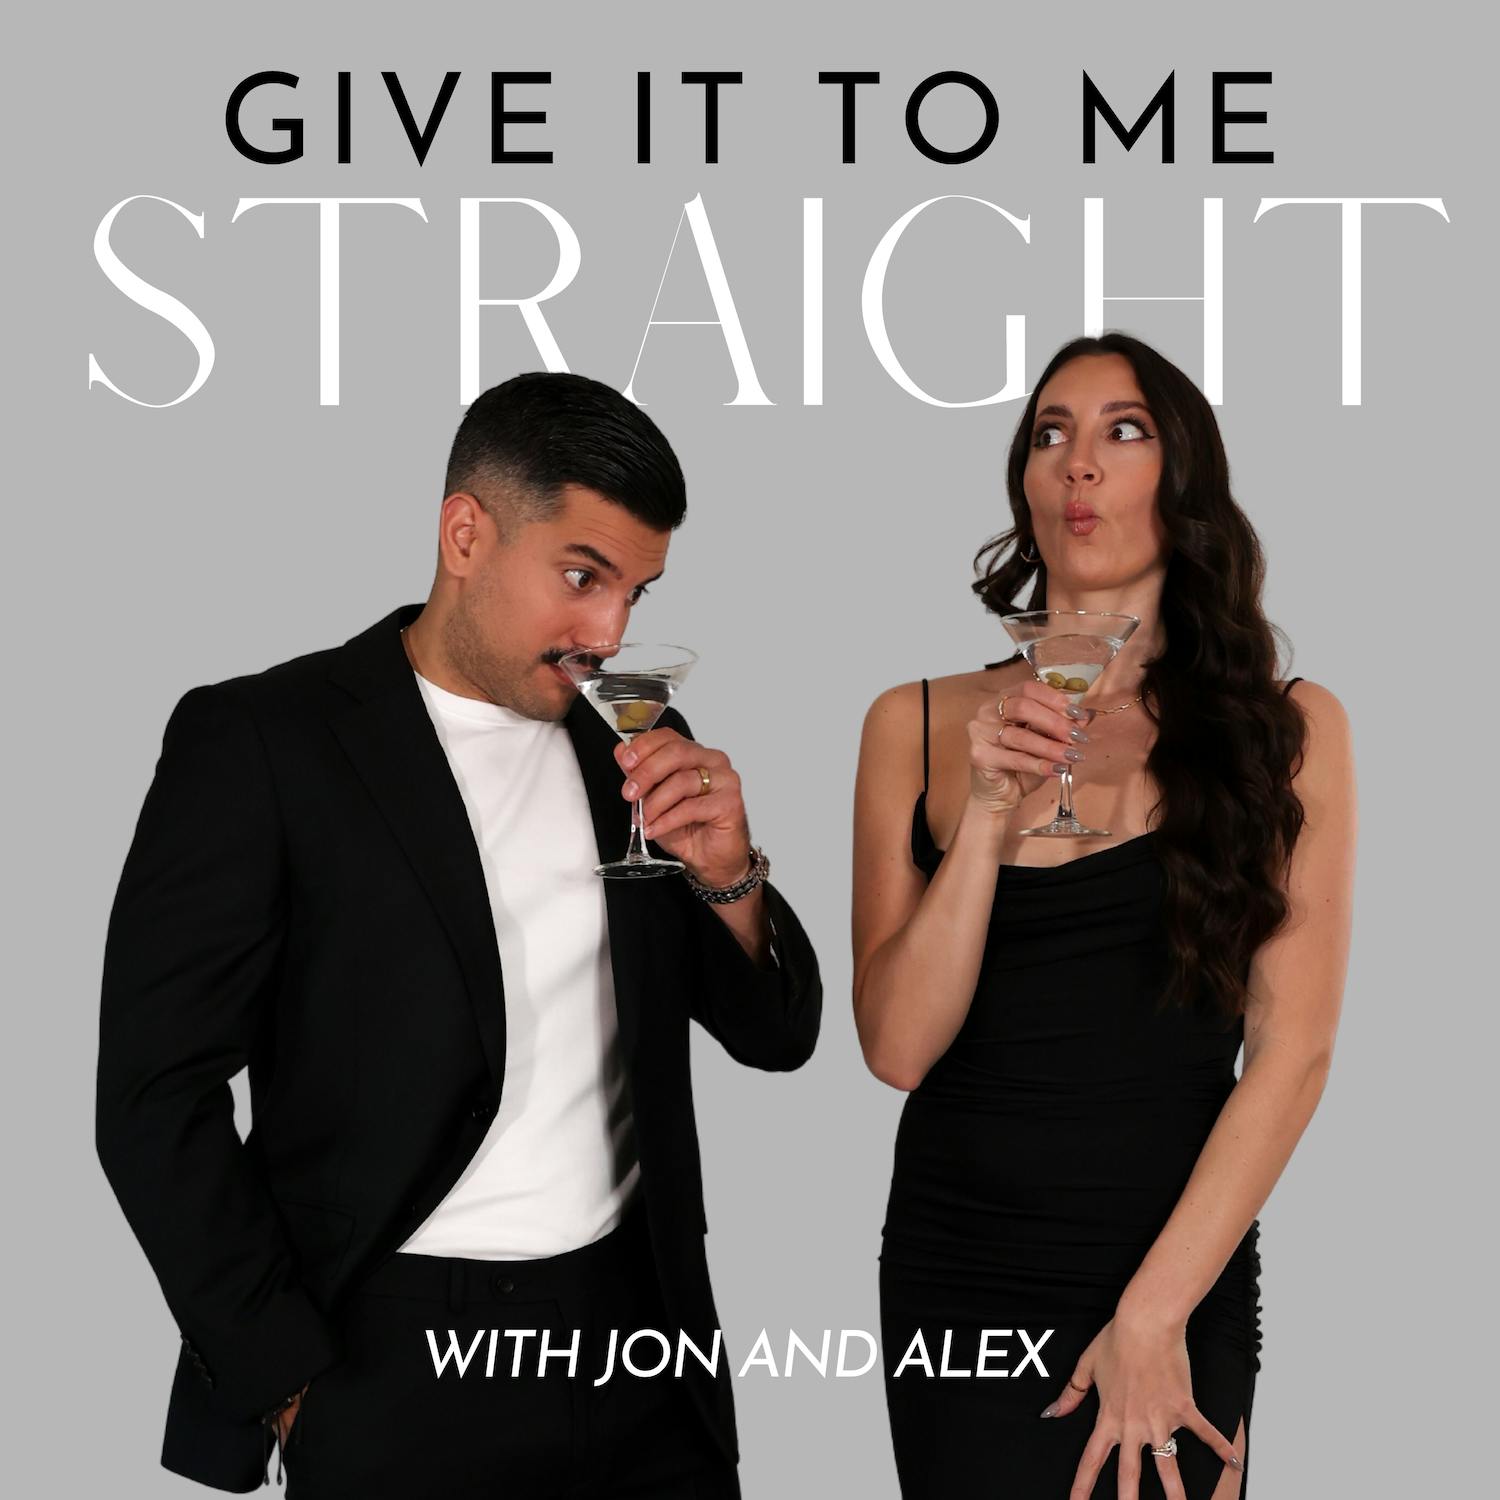 Can You Be Friends With An Ex? feat. Sean Tadlock by Give It To Me Straight